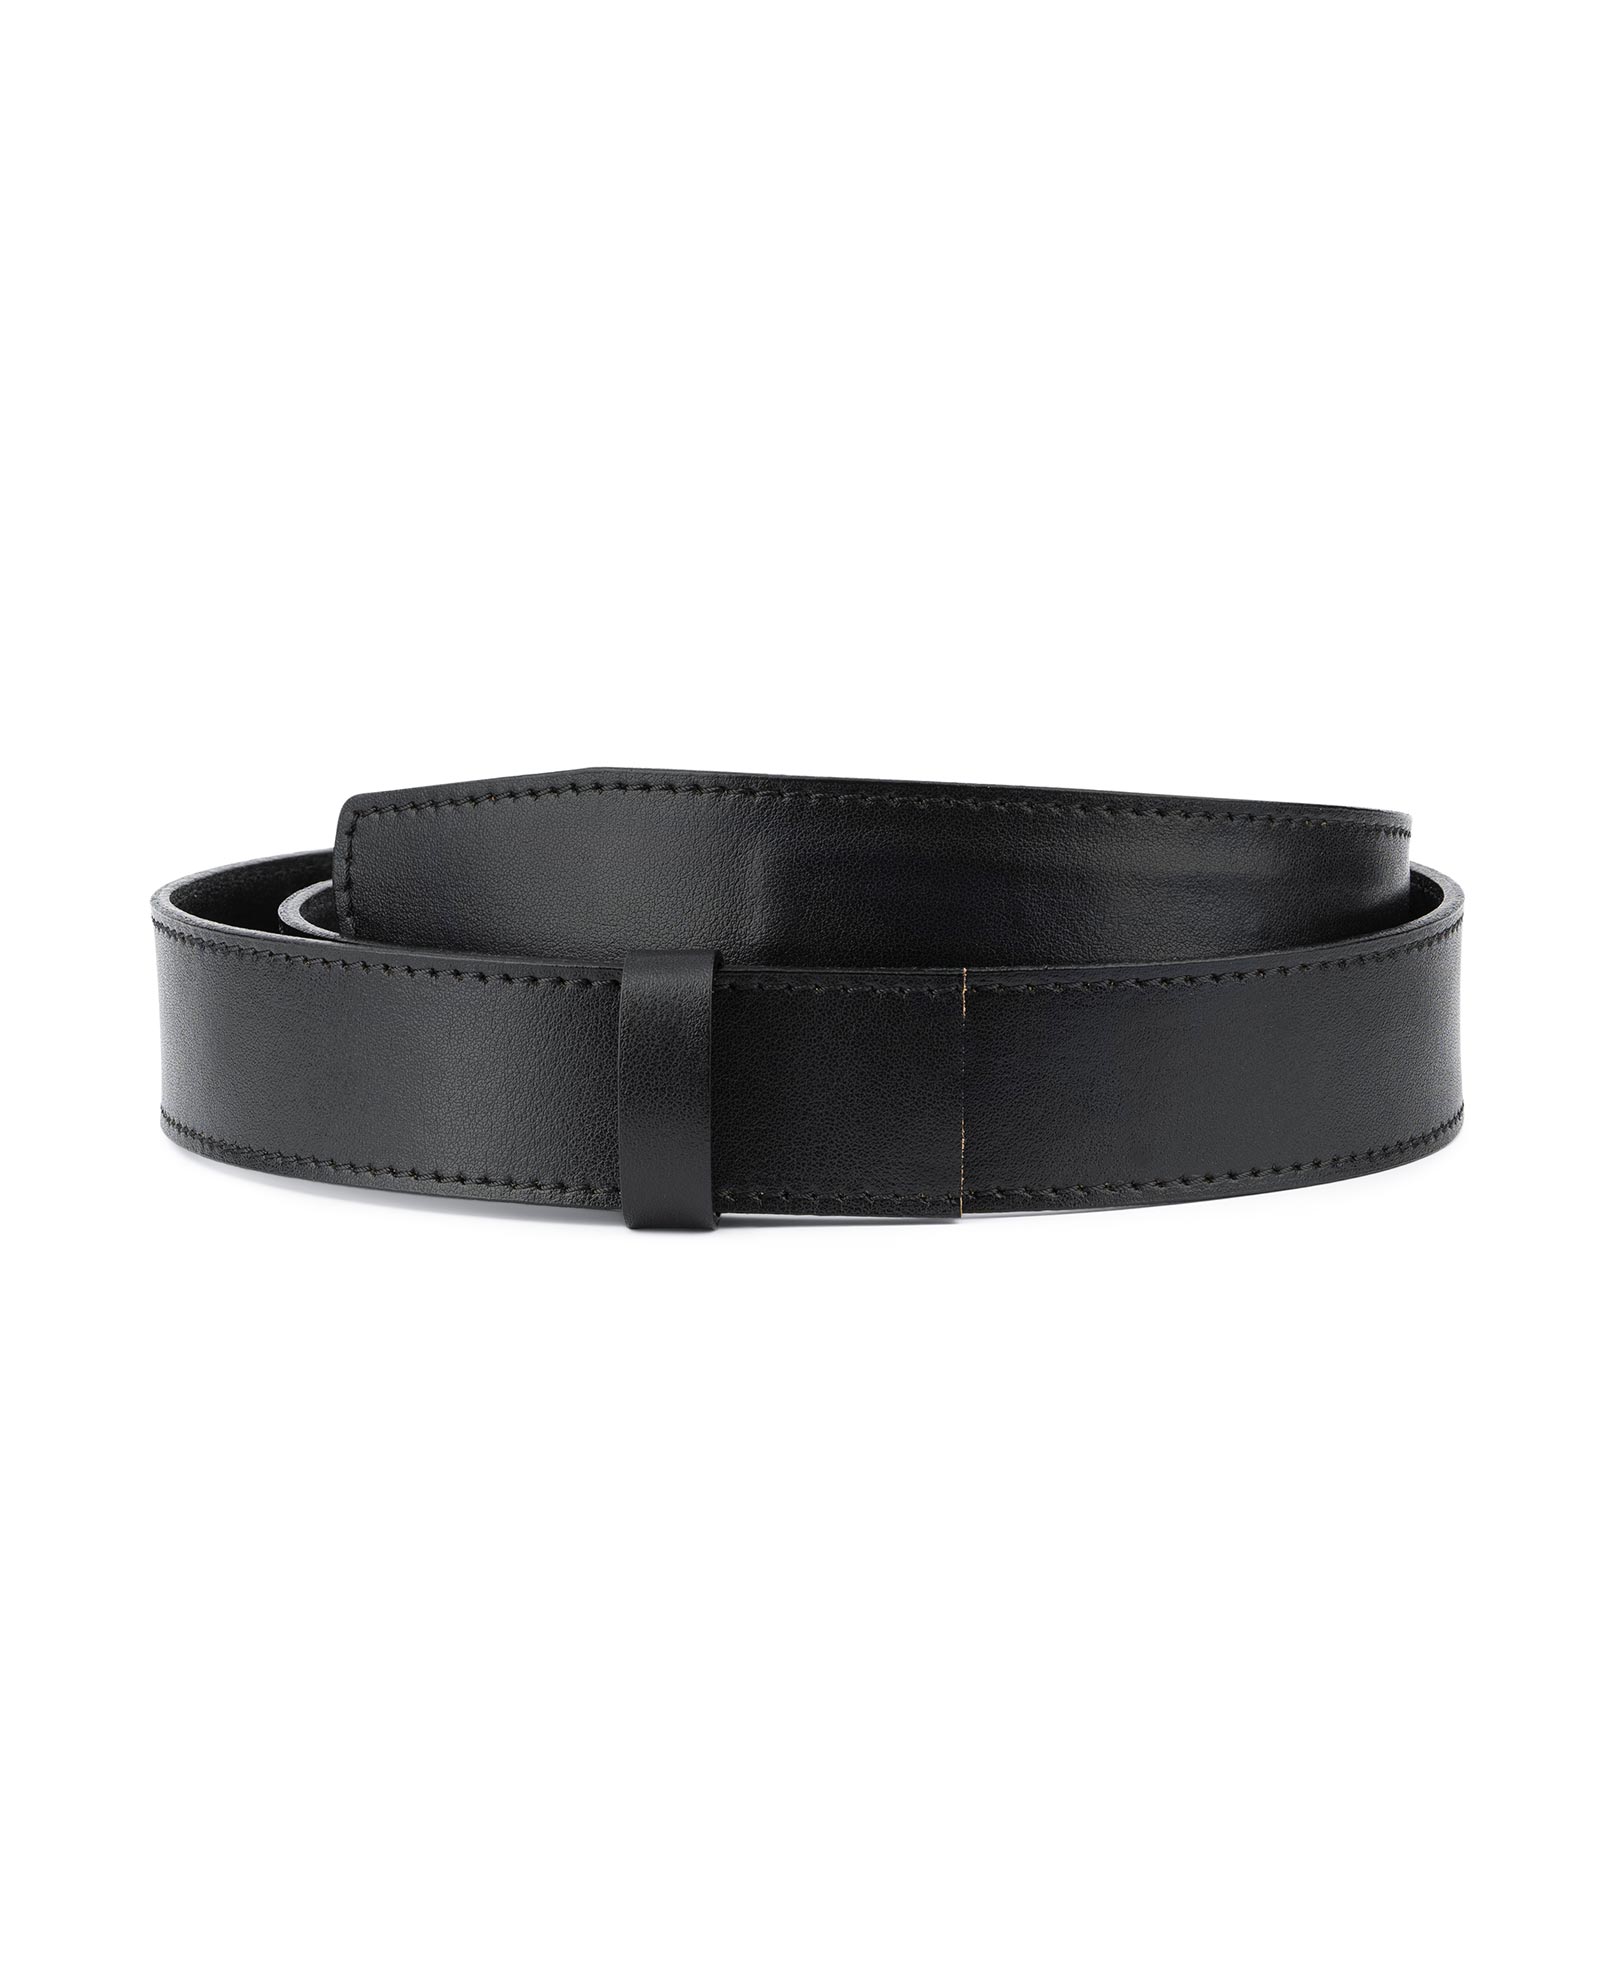 Ratchet Mens Belt Replacement Strap For Automatic Buckle Black Genuine ...